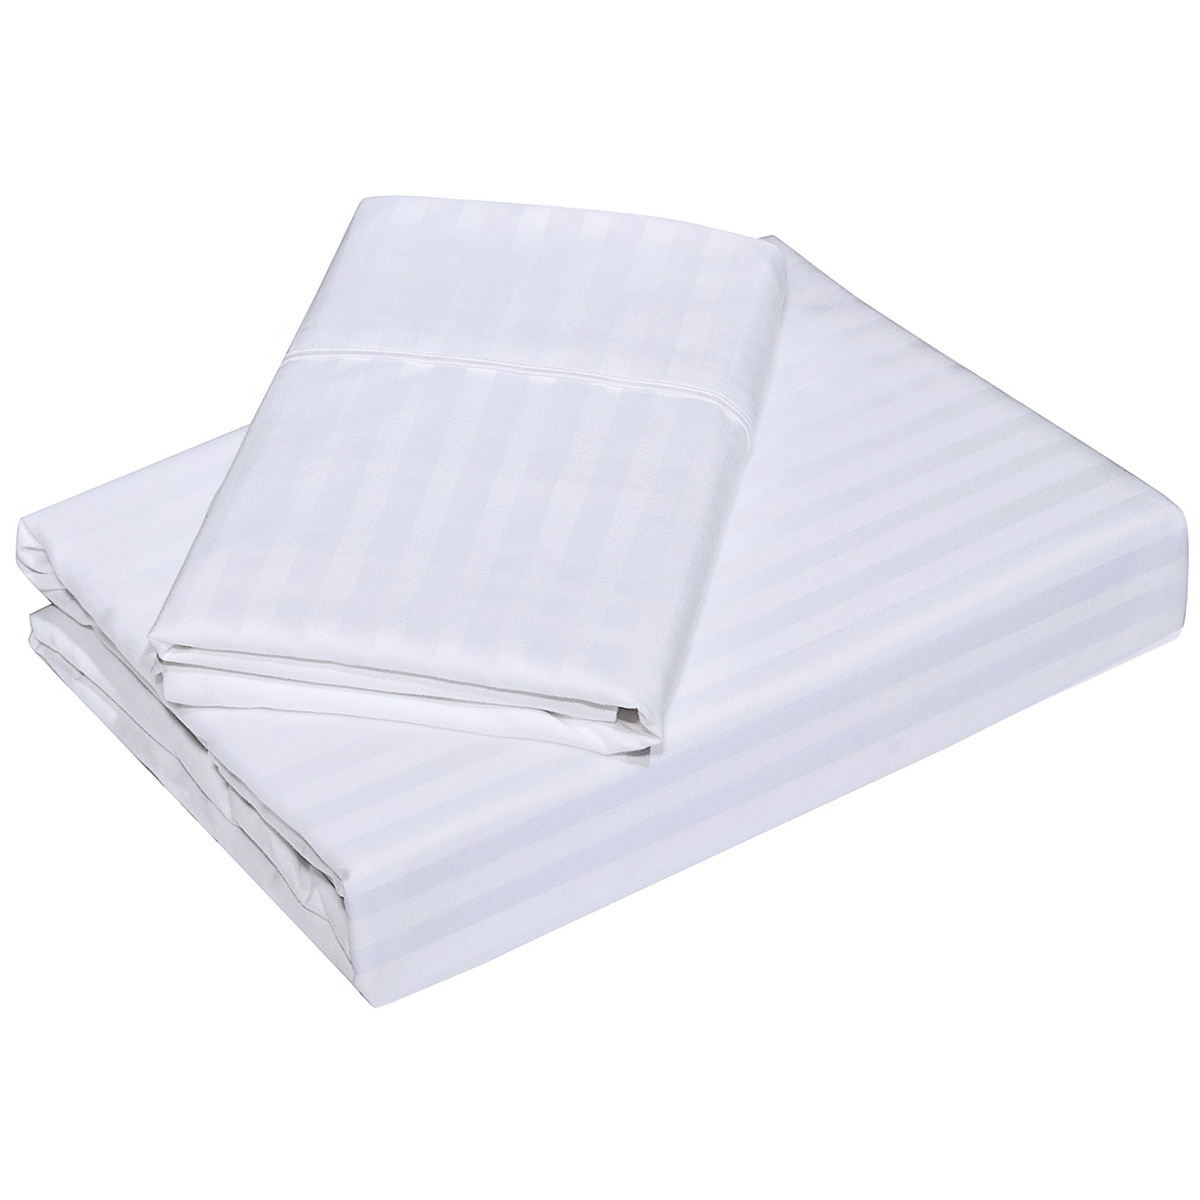 Bdirect Royal Comfort Blended Bamboo Sheet Set with stripes Double - White